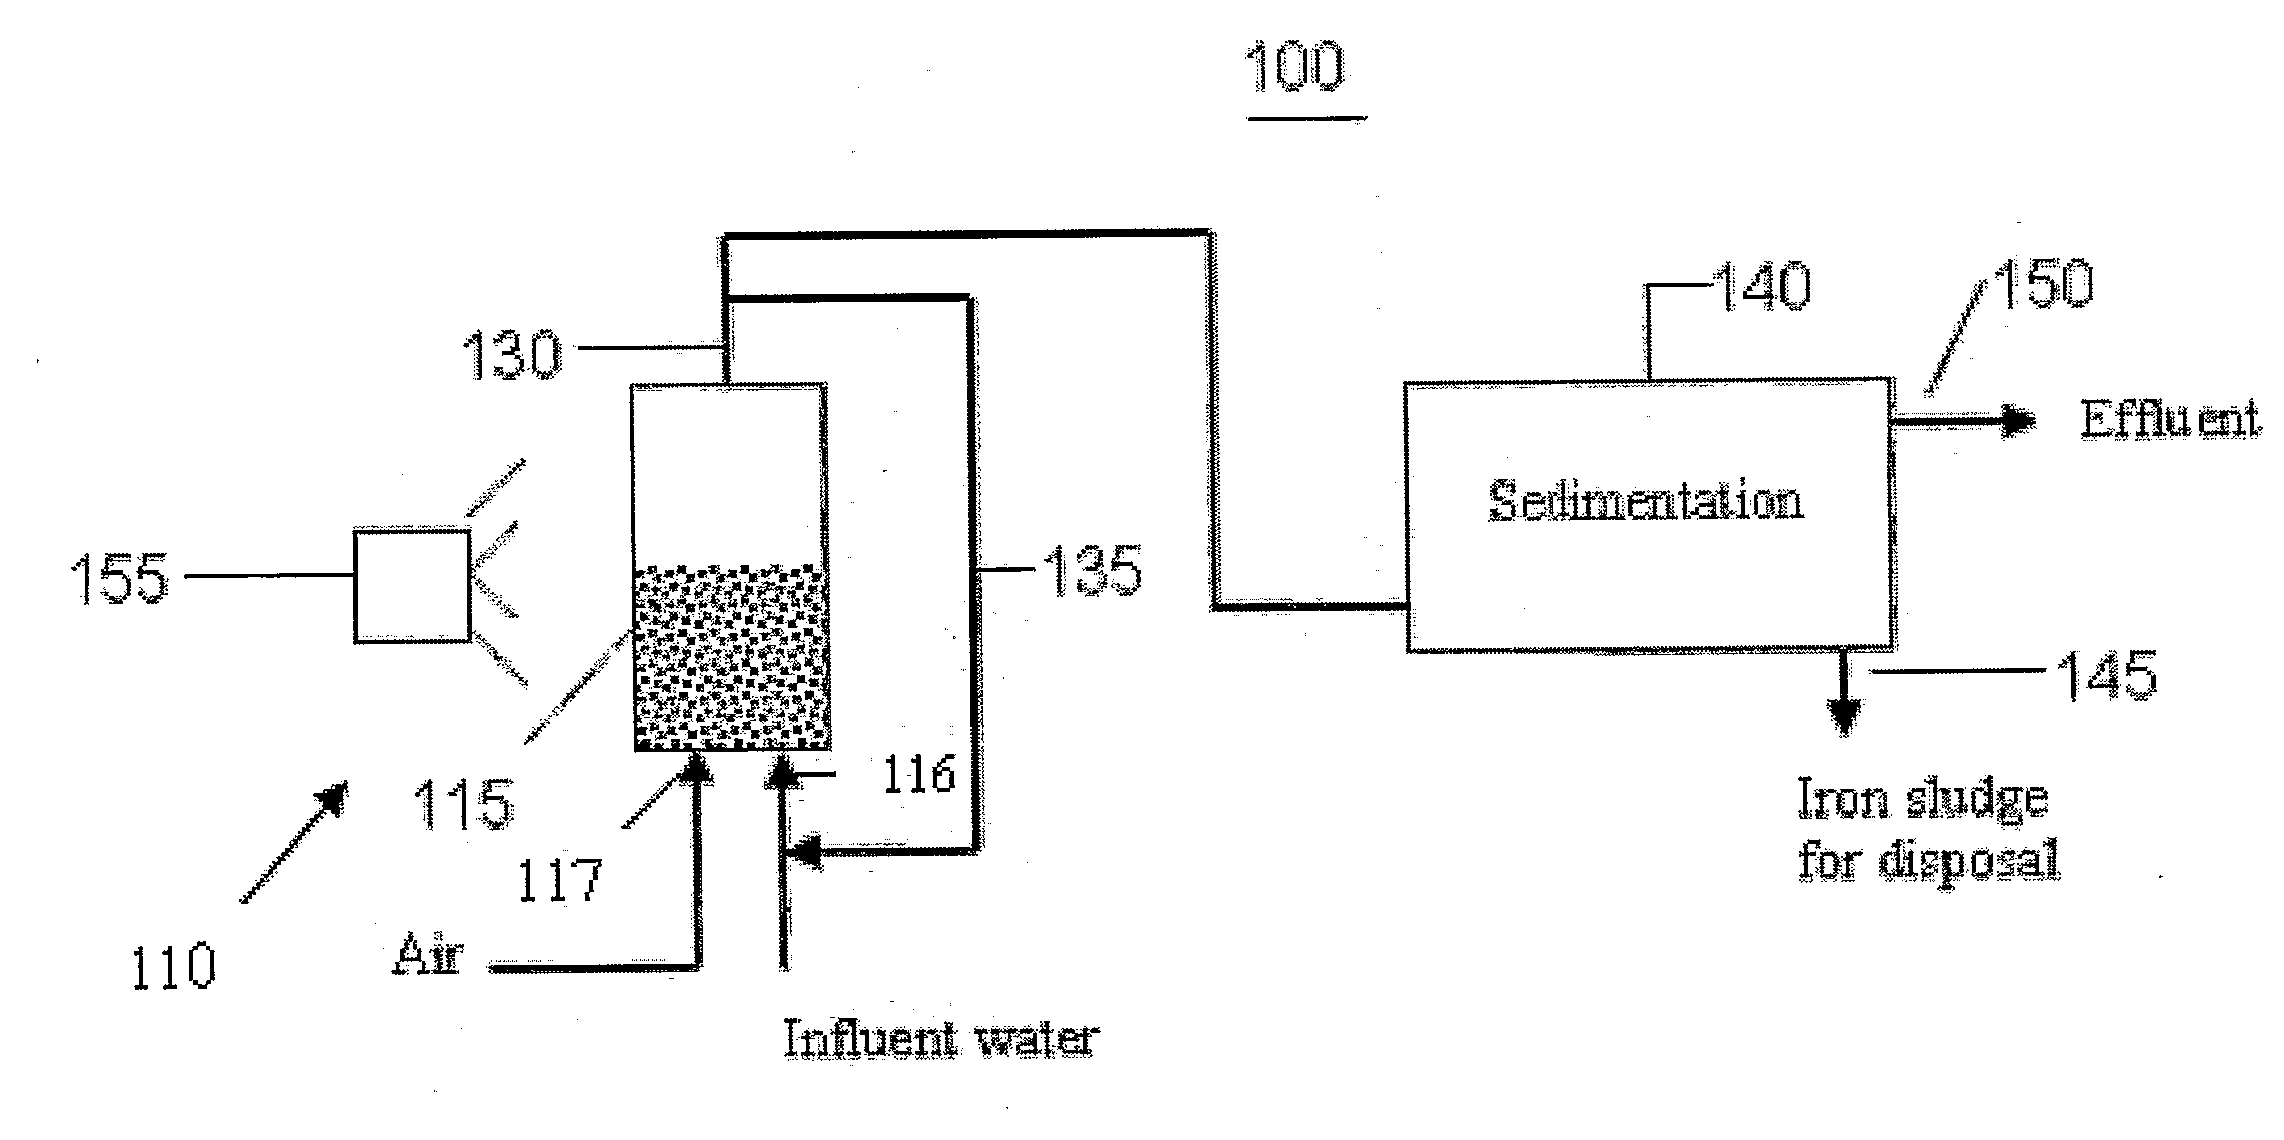 Metal mediated aeration for water and wastewater purification